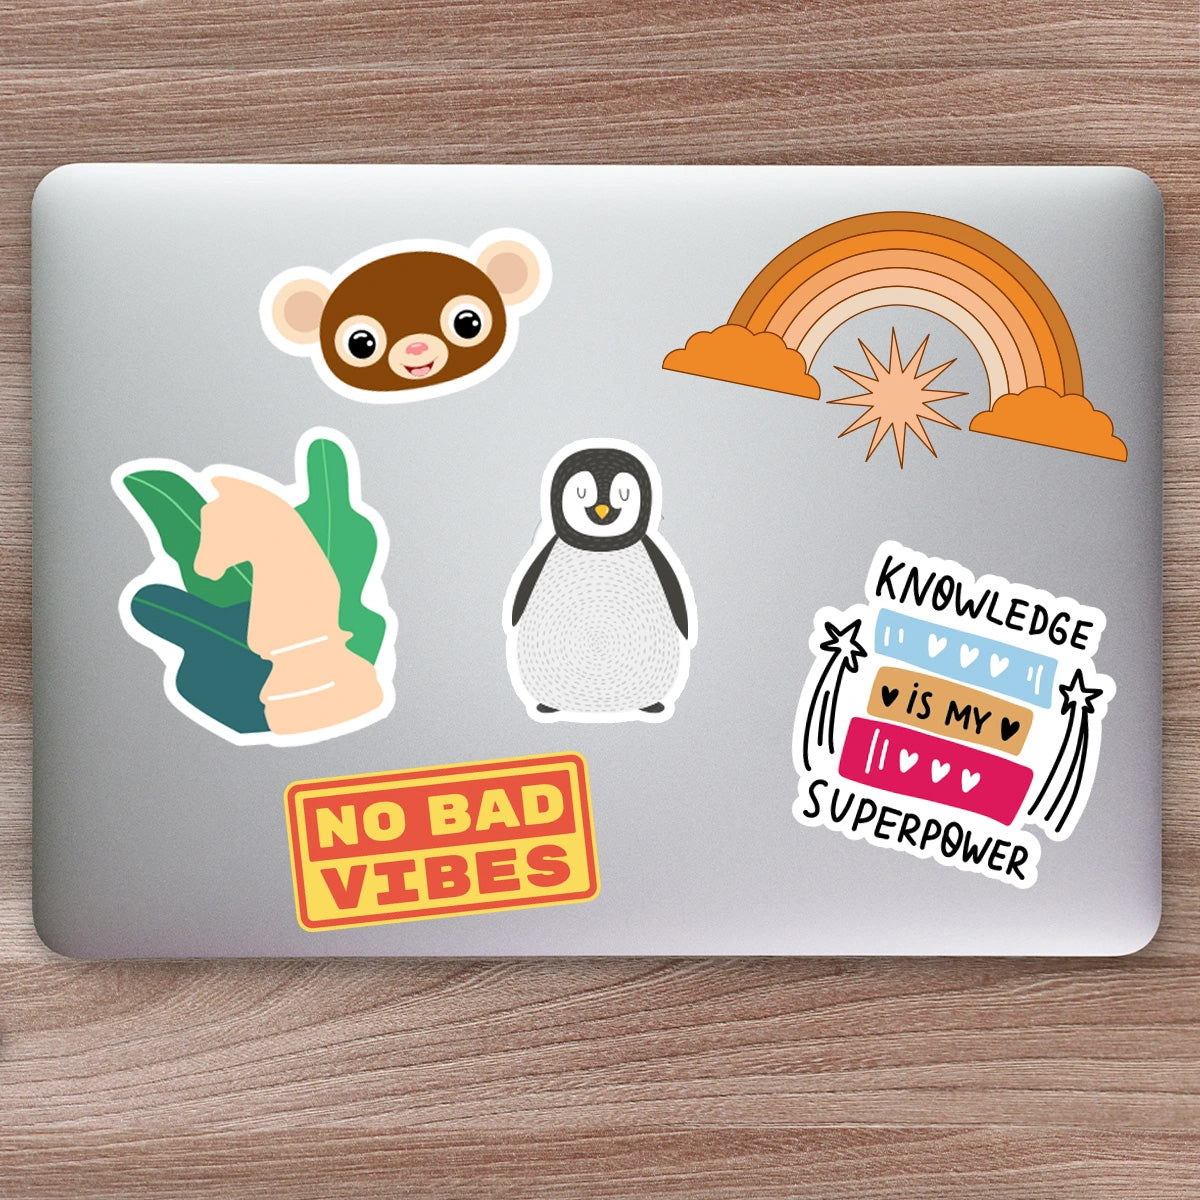 Print some branded laptop stickers and hand them out to staff and students  